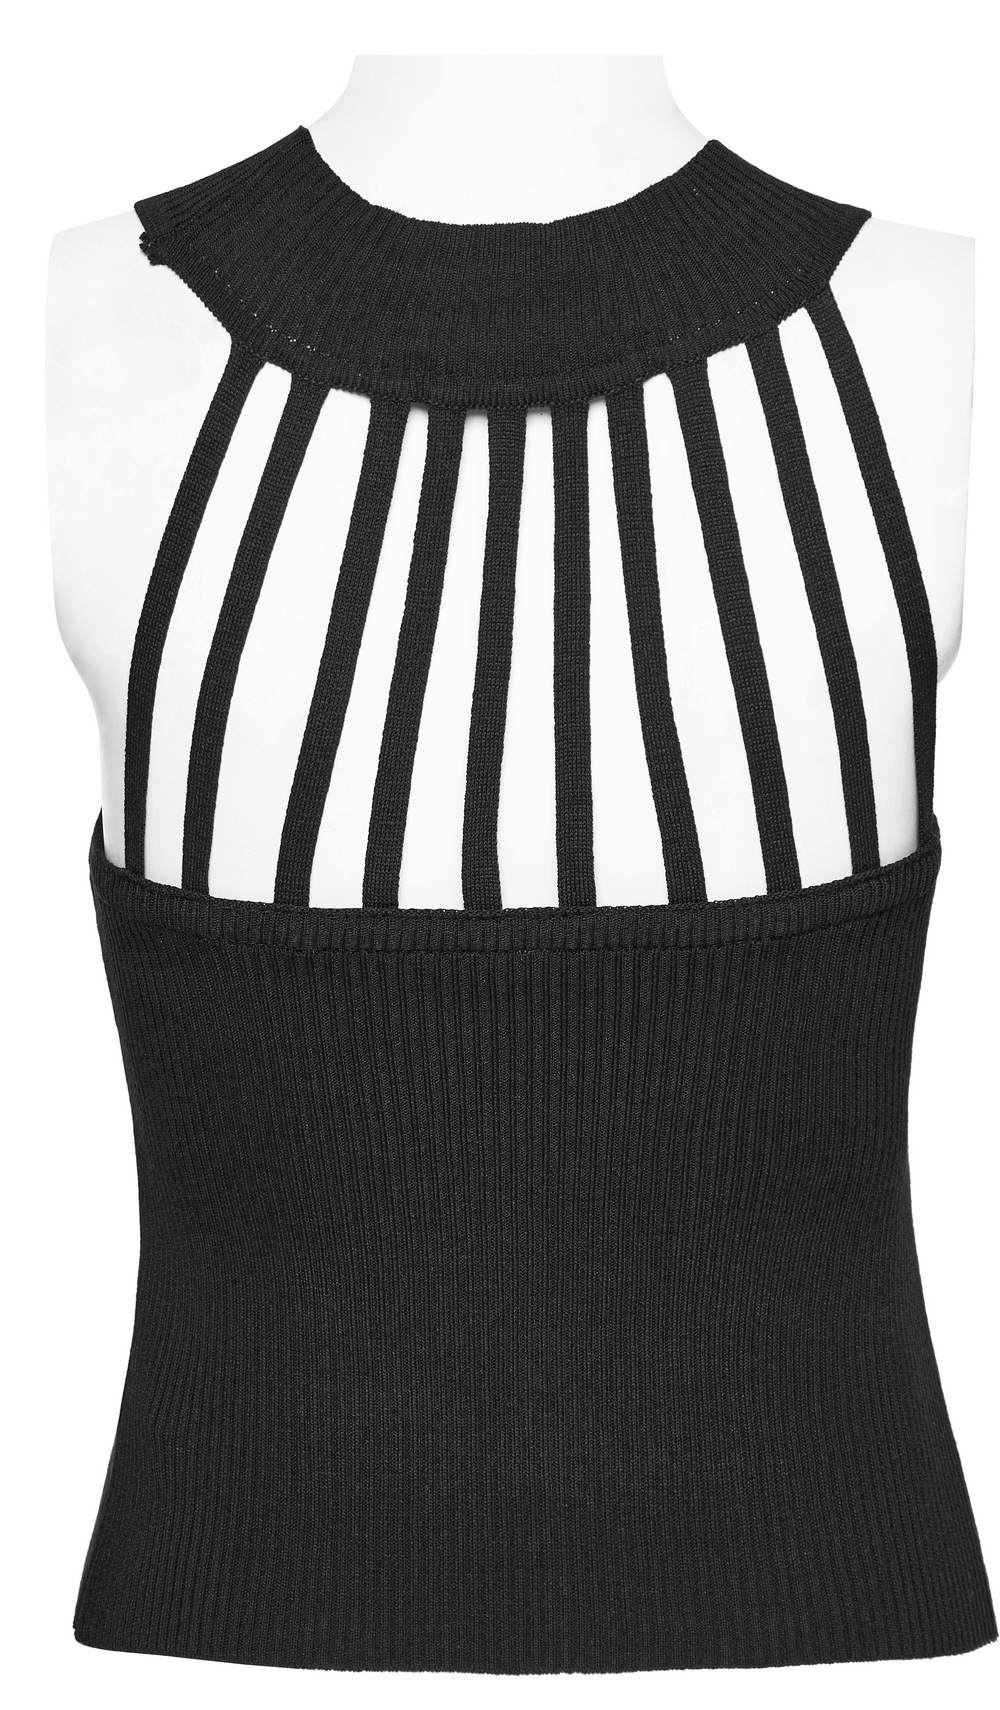 Edgy Halter Neck Knit Top with Woven Belt Detail